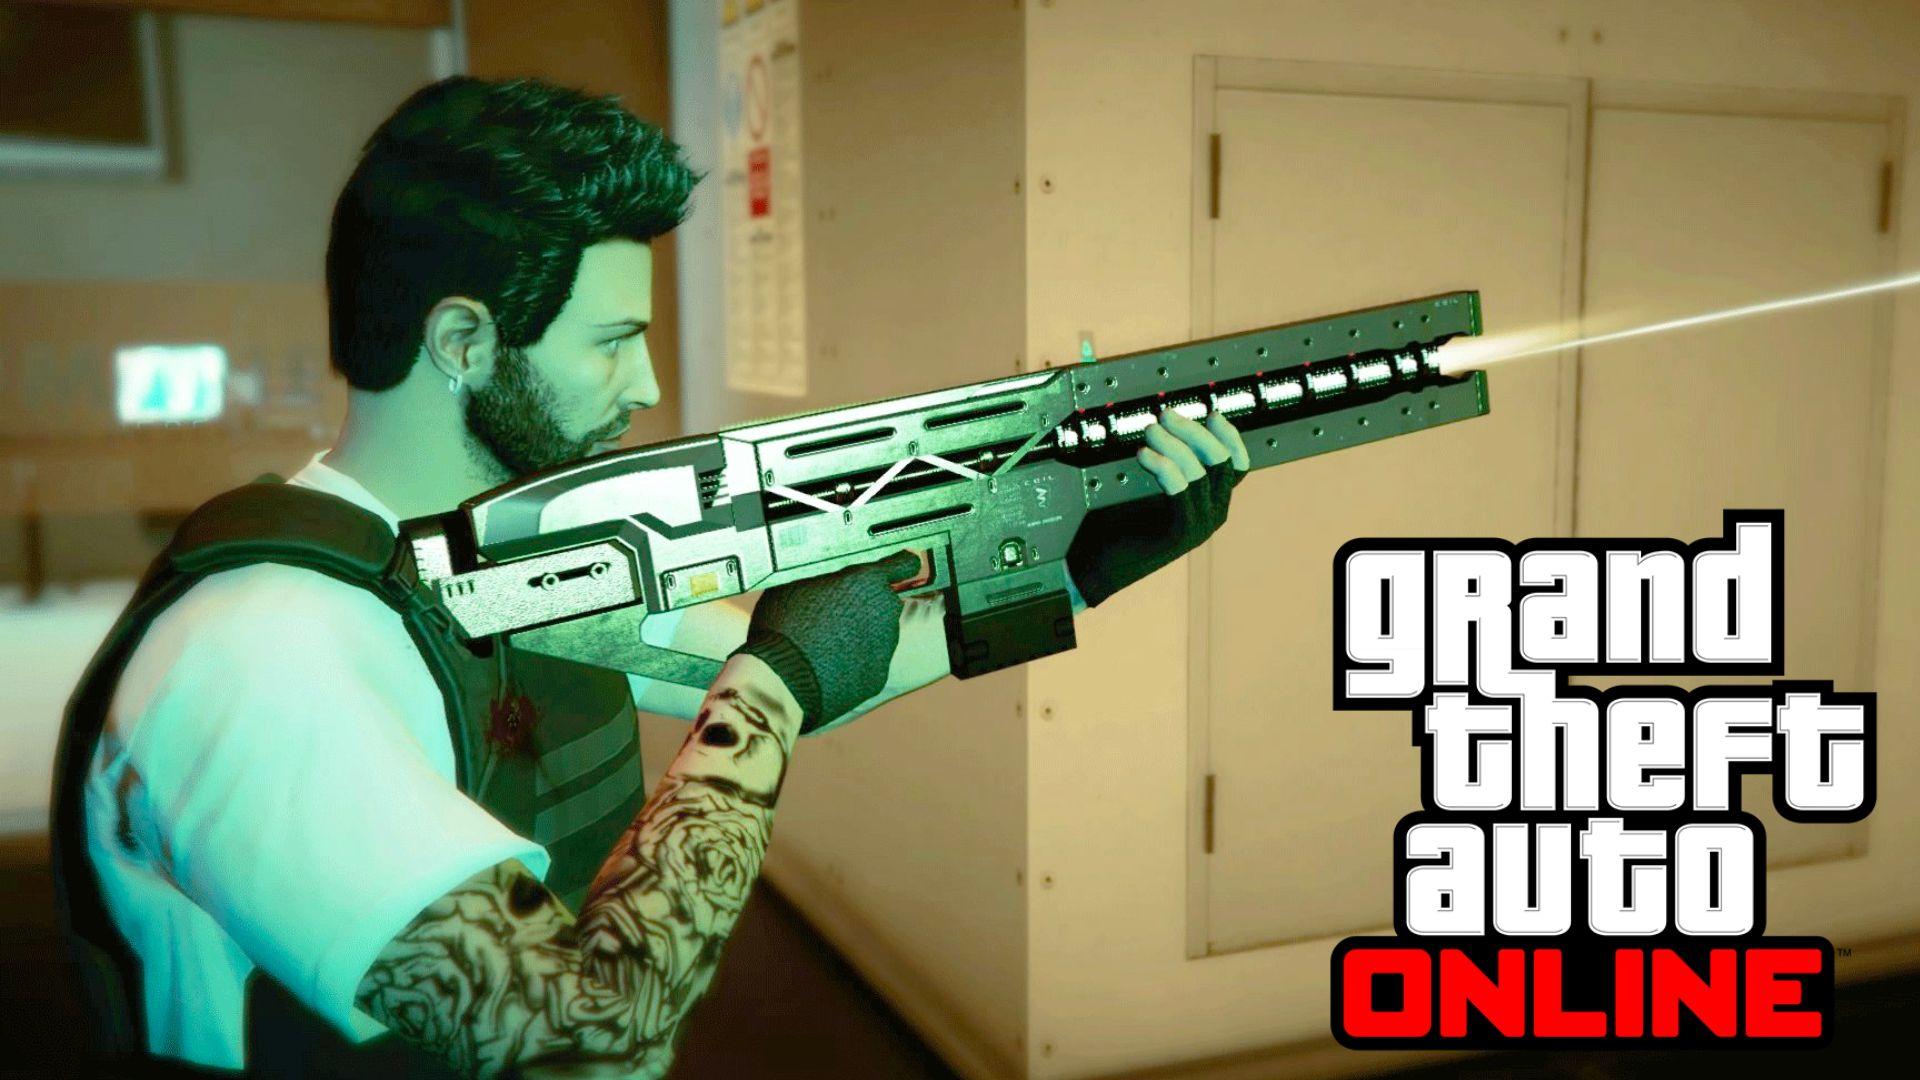 GTA Online character shooting Rail Gun while dressed in body armour